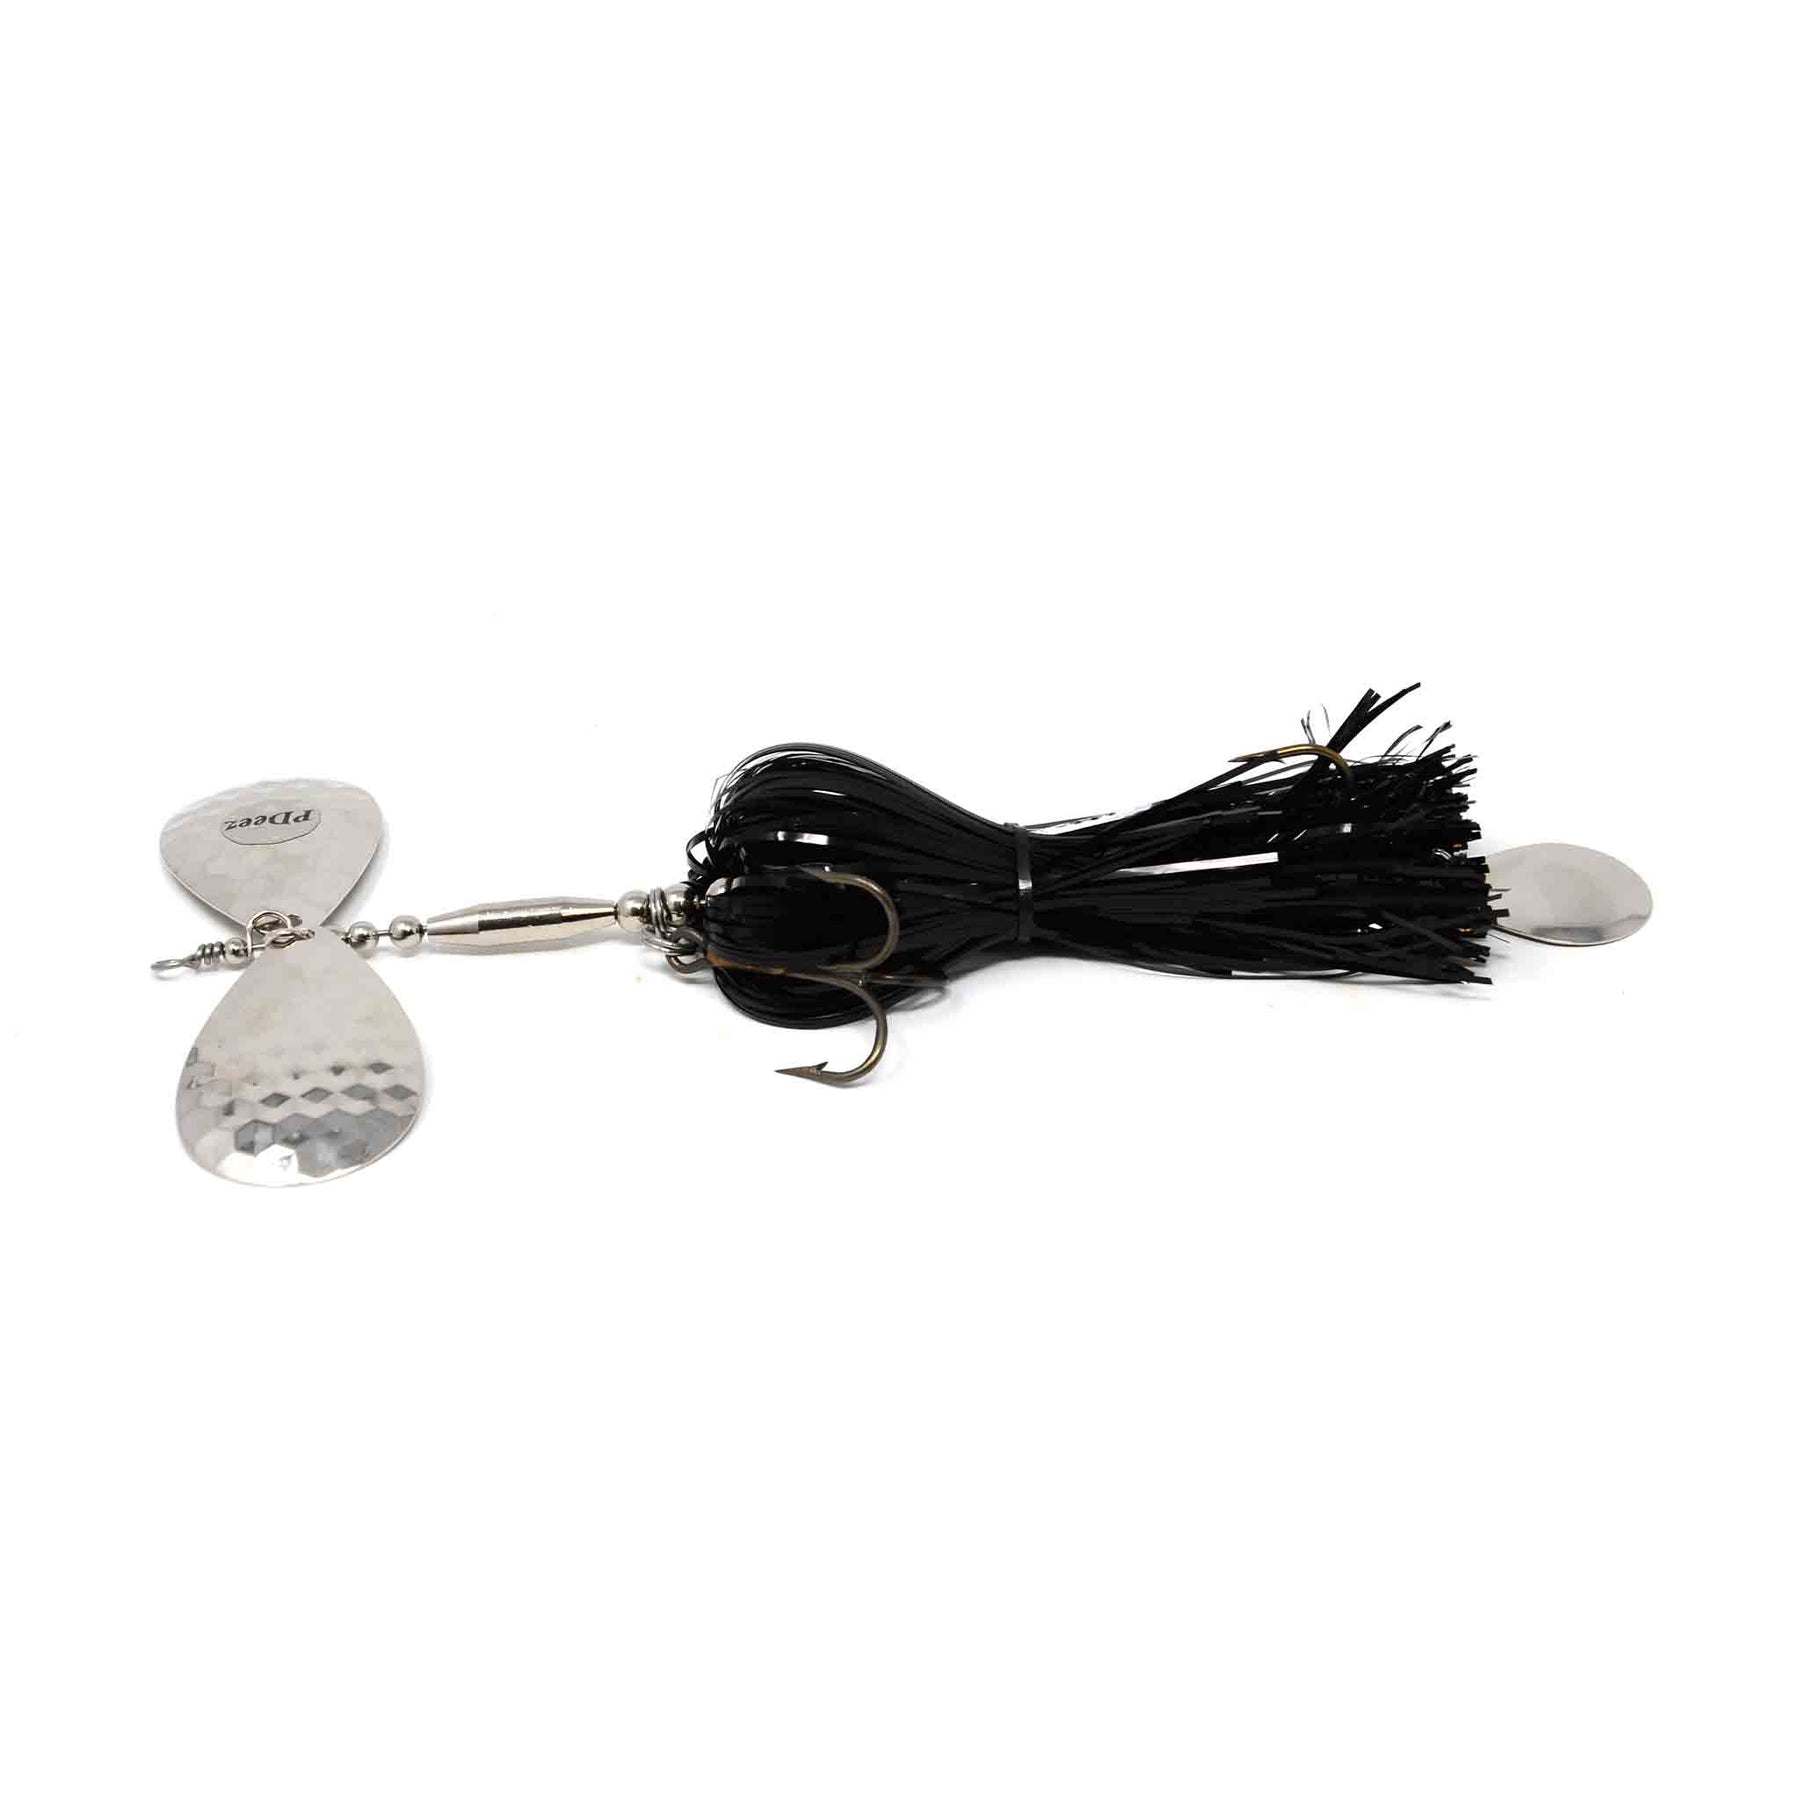 Pdeez LSG Missile Tail Spin (9/9) Black / Silver Hex Bucktails